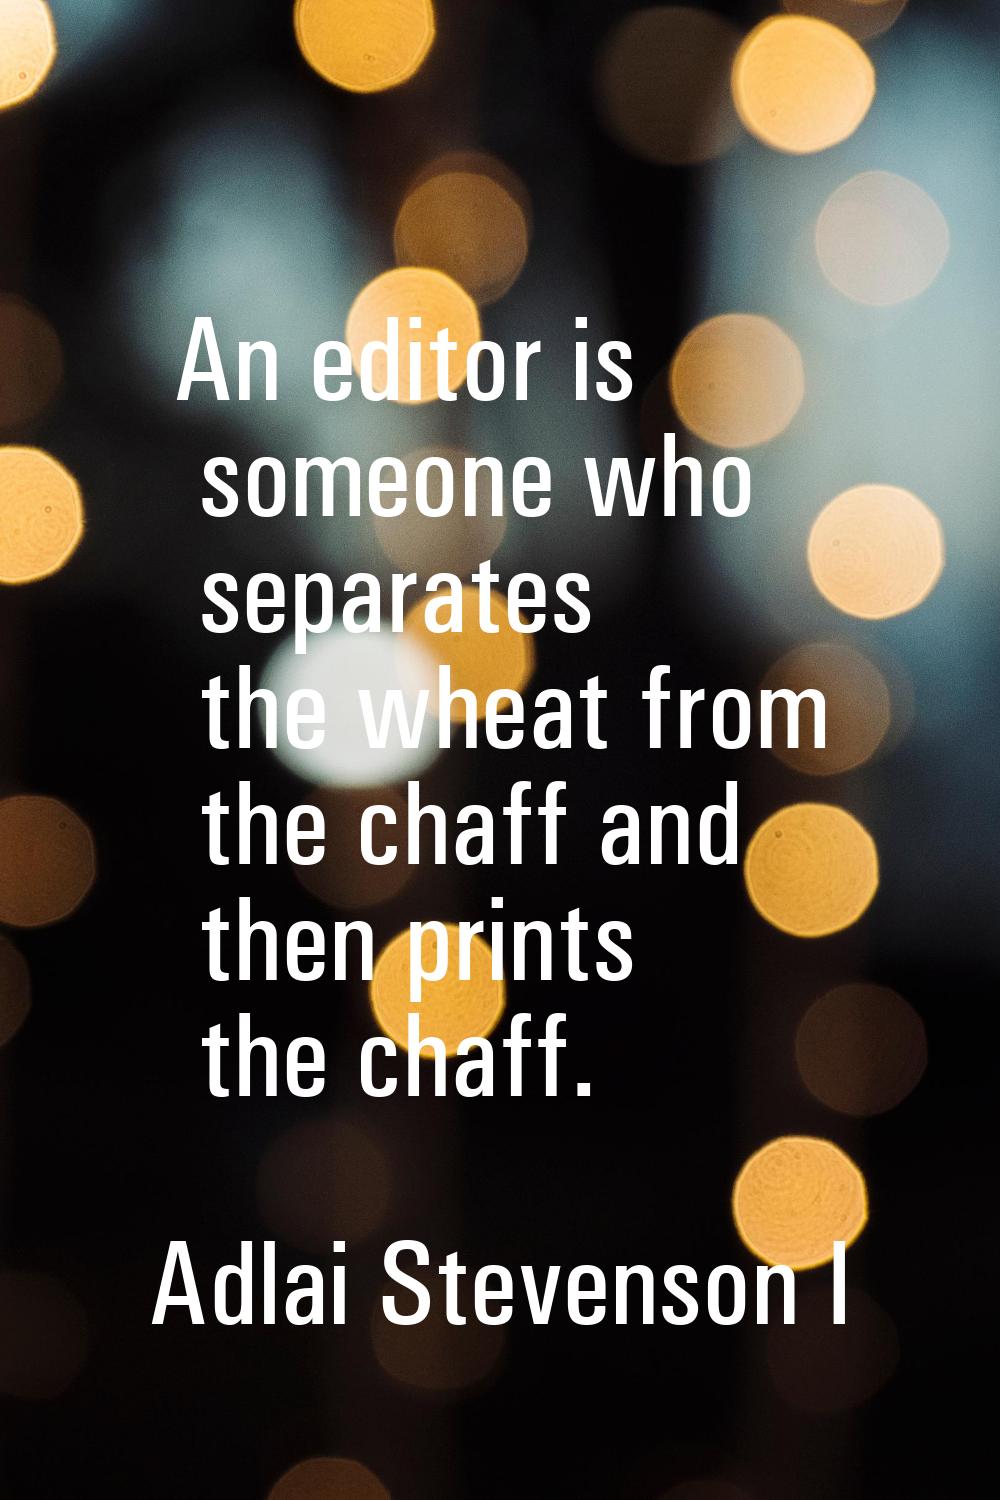 An editor is someone who separates the wheat from the chaff and then prints the chaff.